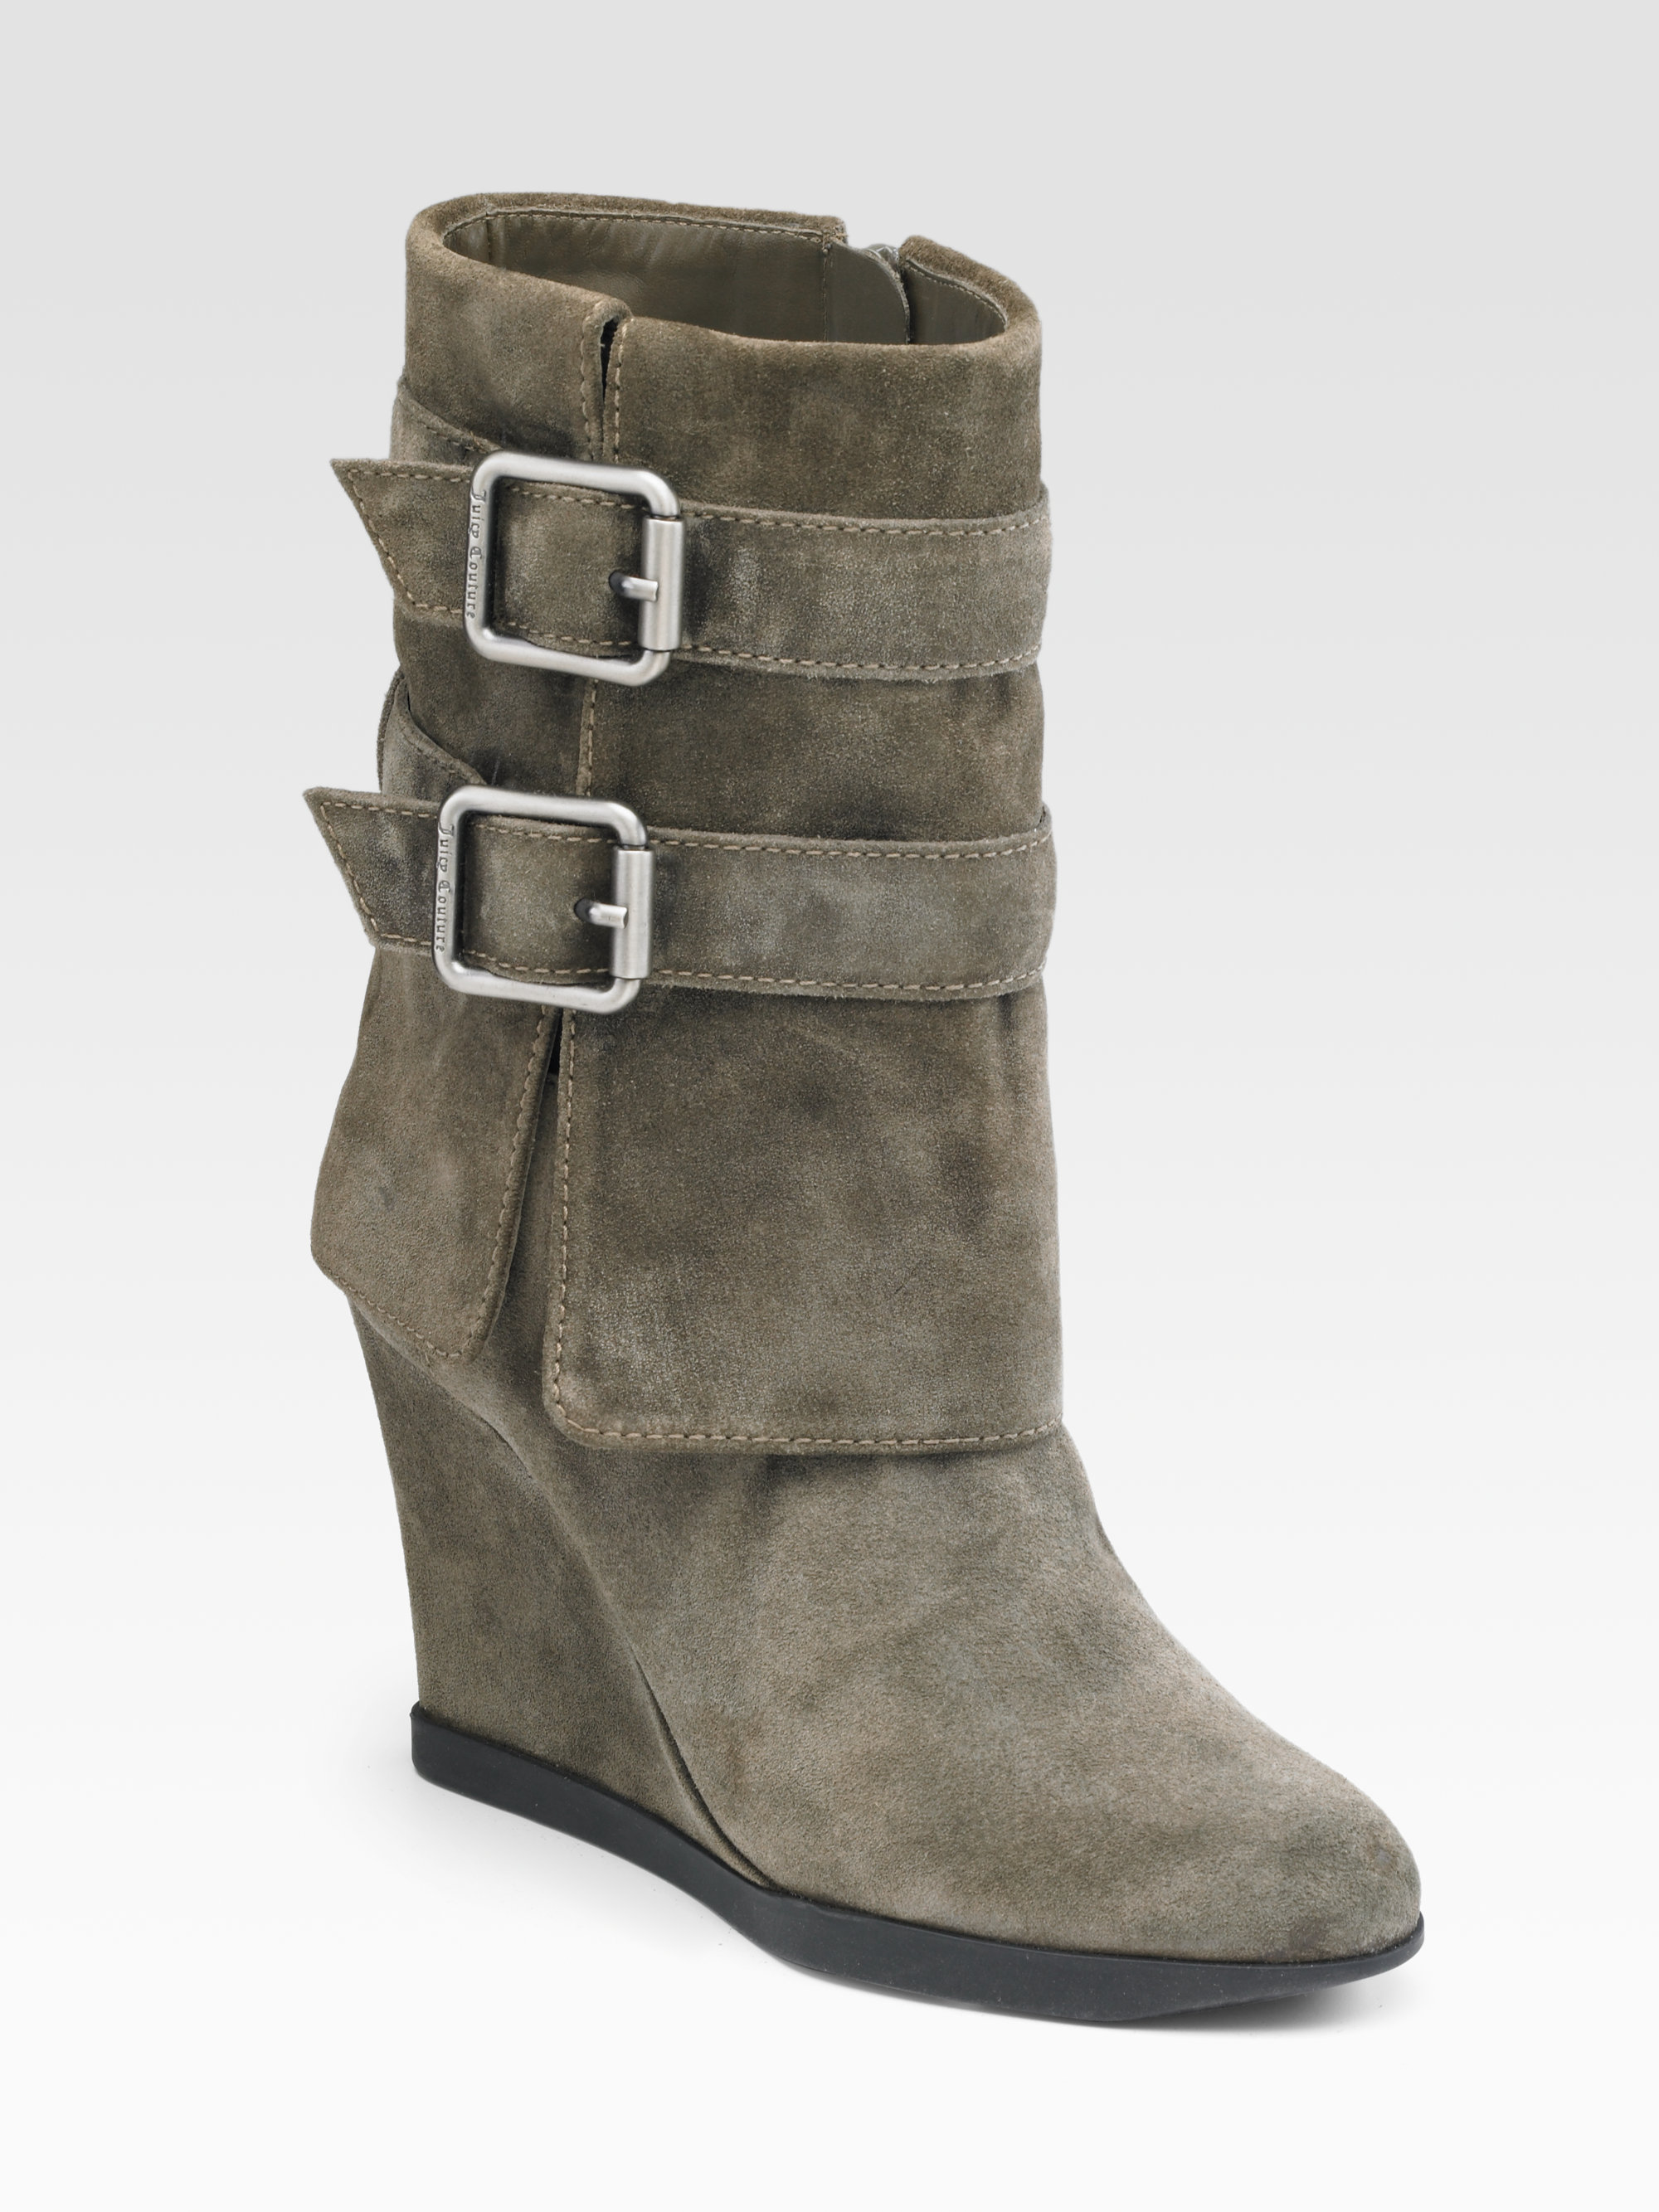 Juicy Couture Dale Bucklecuff Suede Ankle Boots in Gray